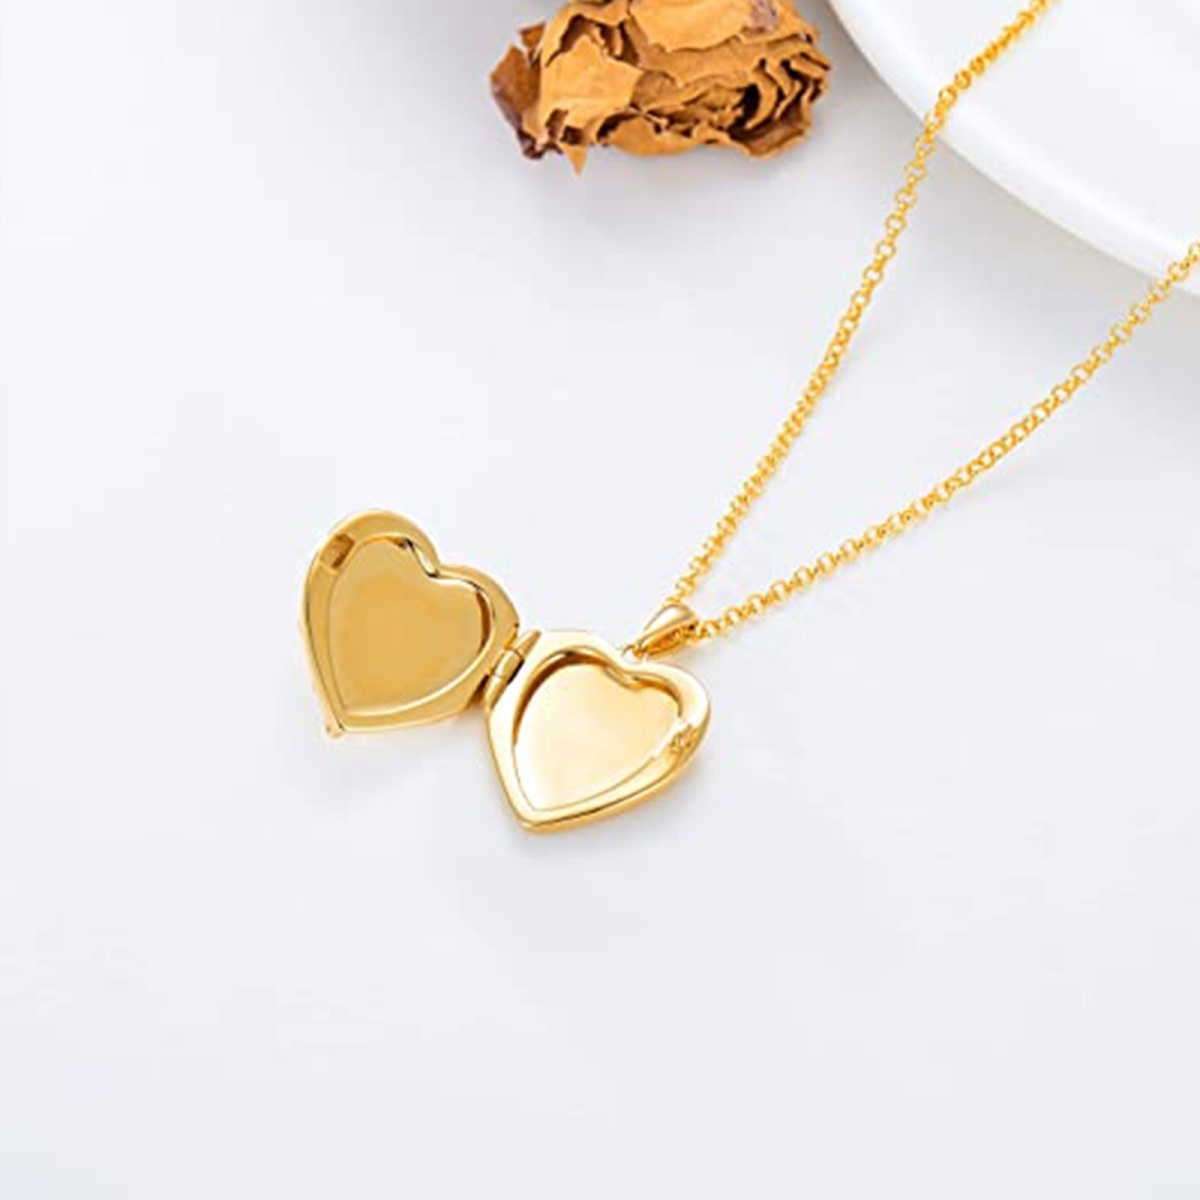 10K Gold Personalized Photo & Heart Personalized Photo Locket Necklace-6